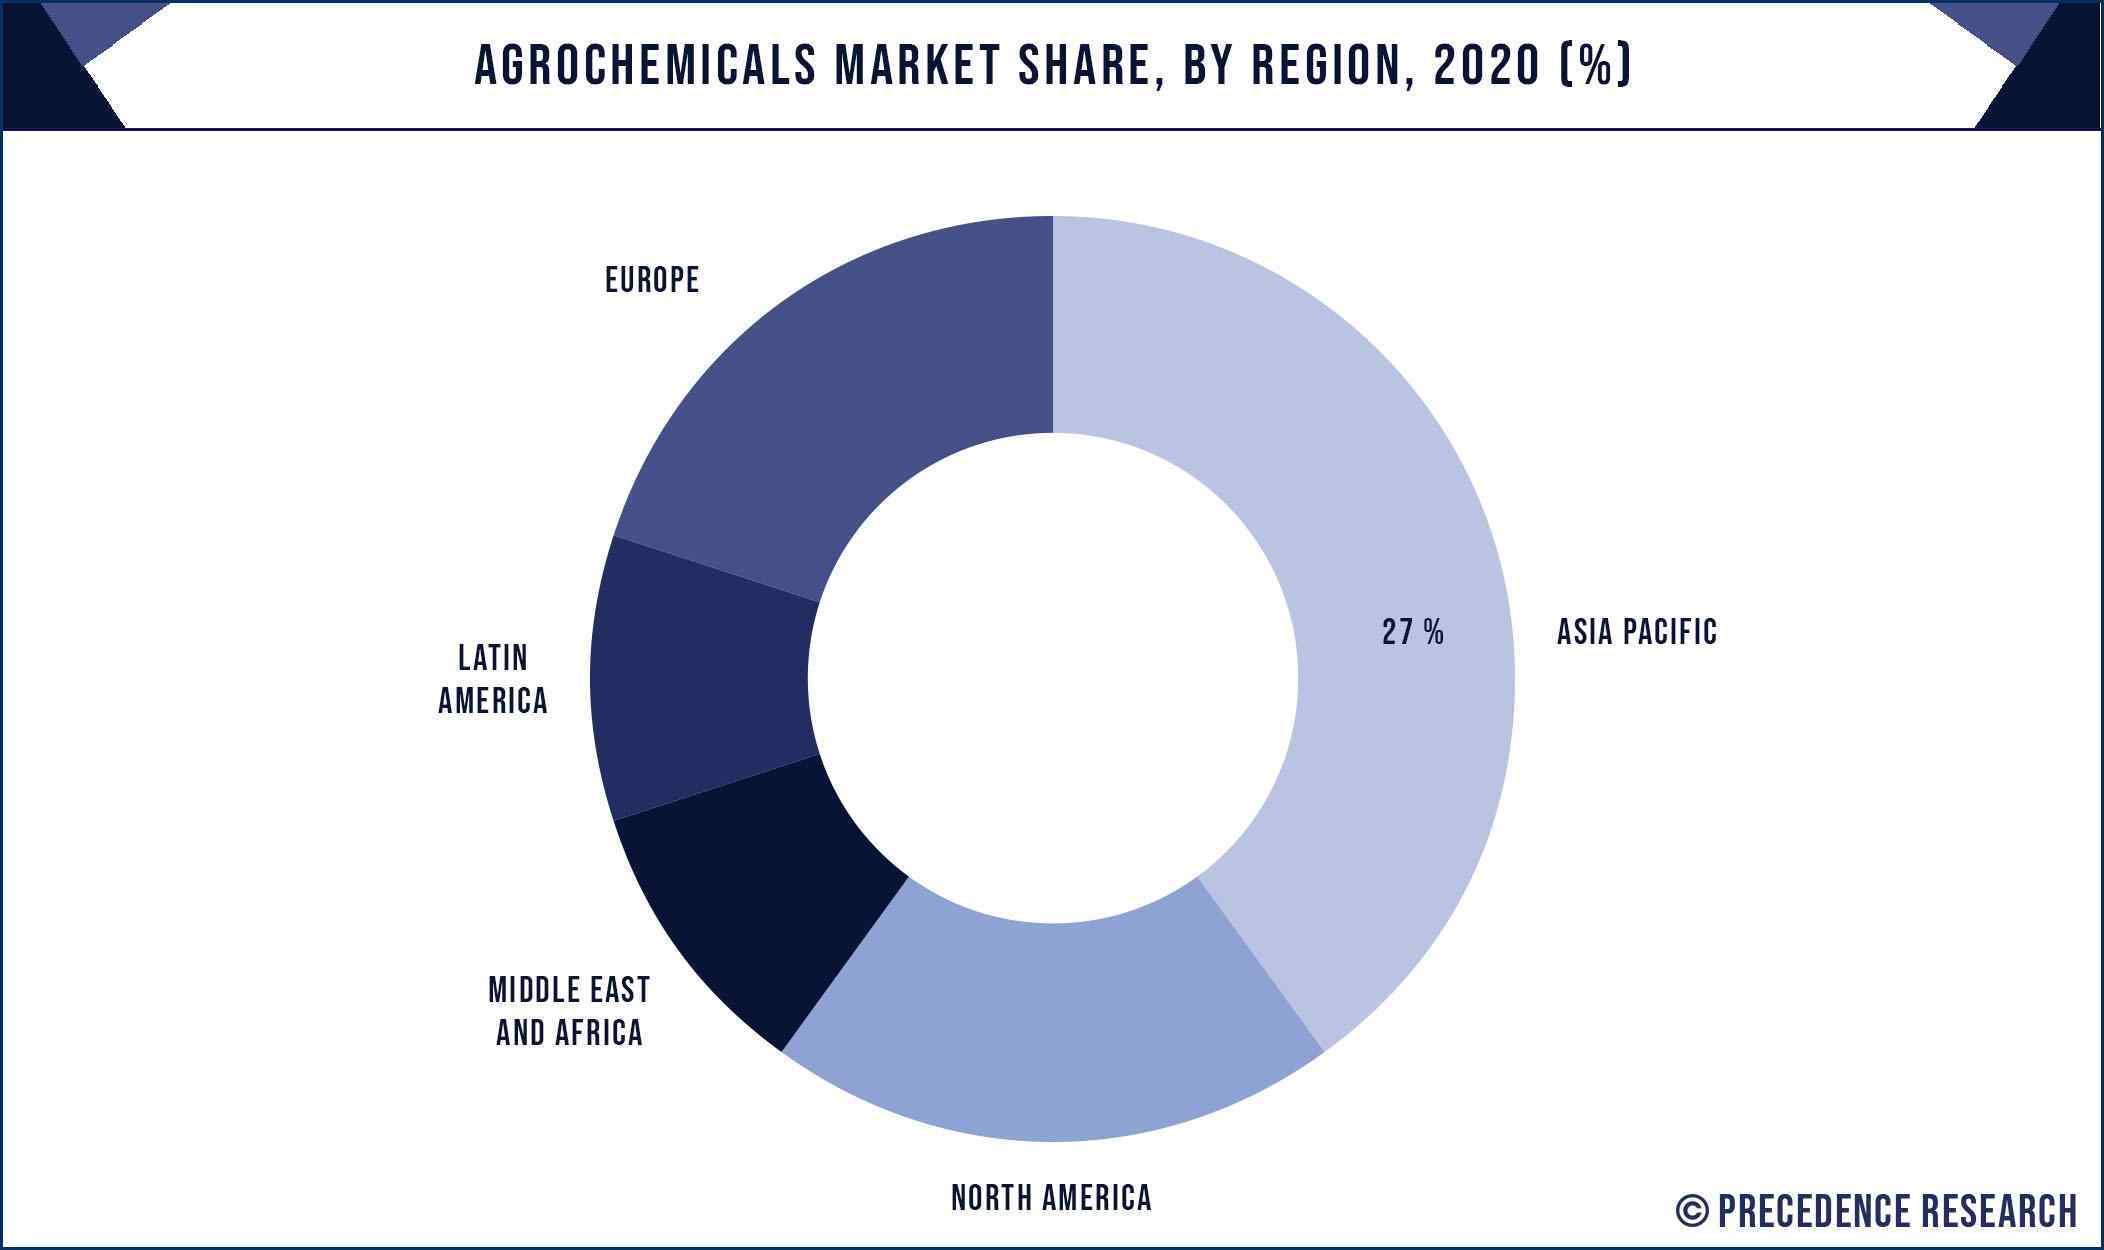 Agrochemicals Market Share, By Region, 2020 (%)